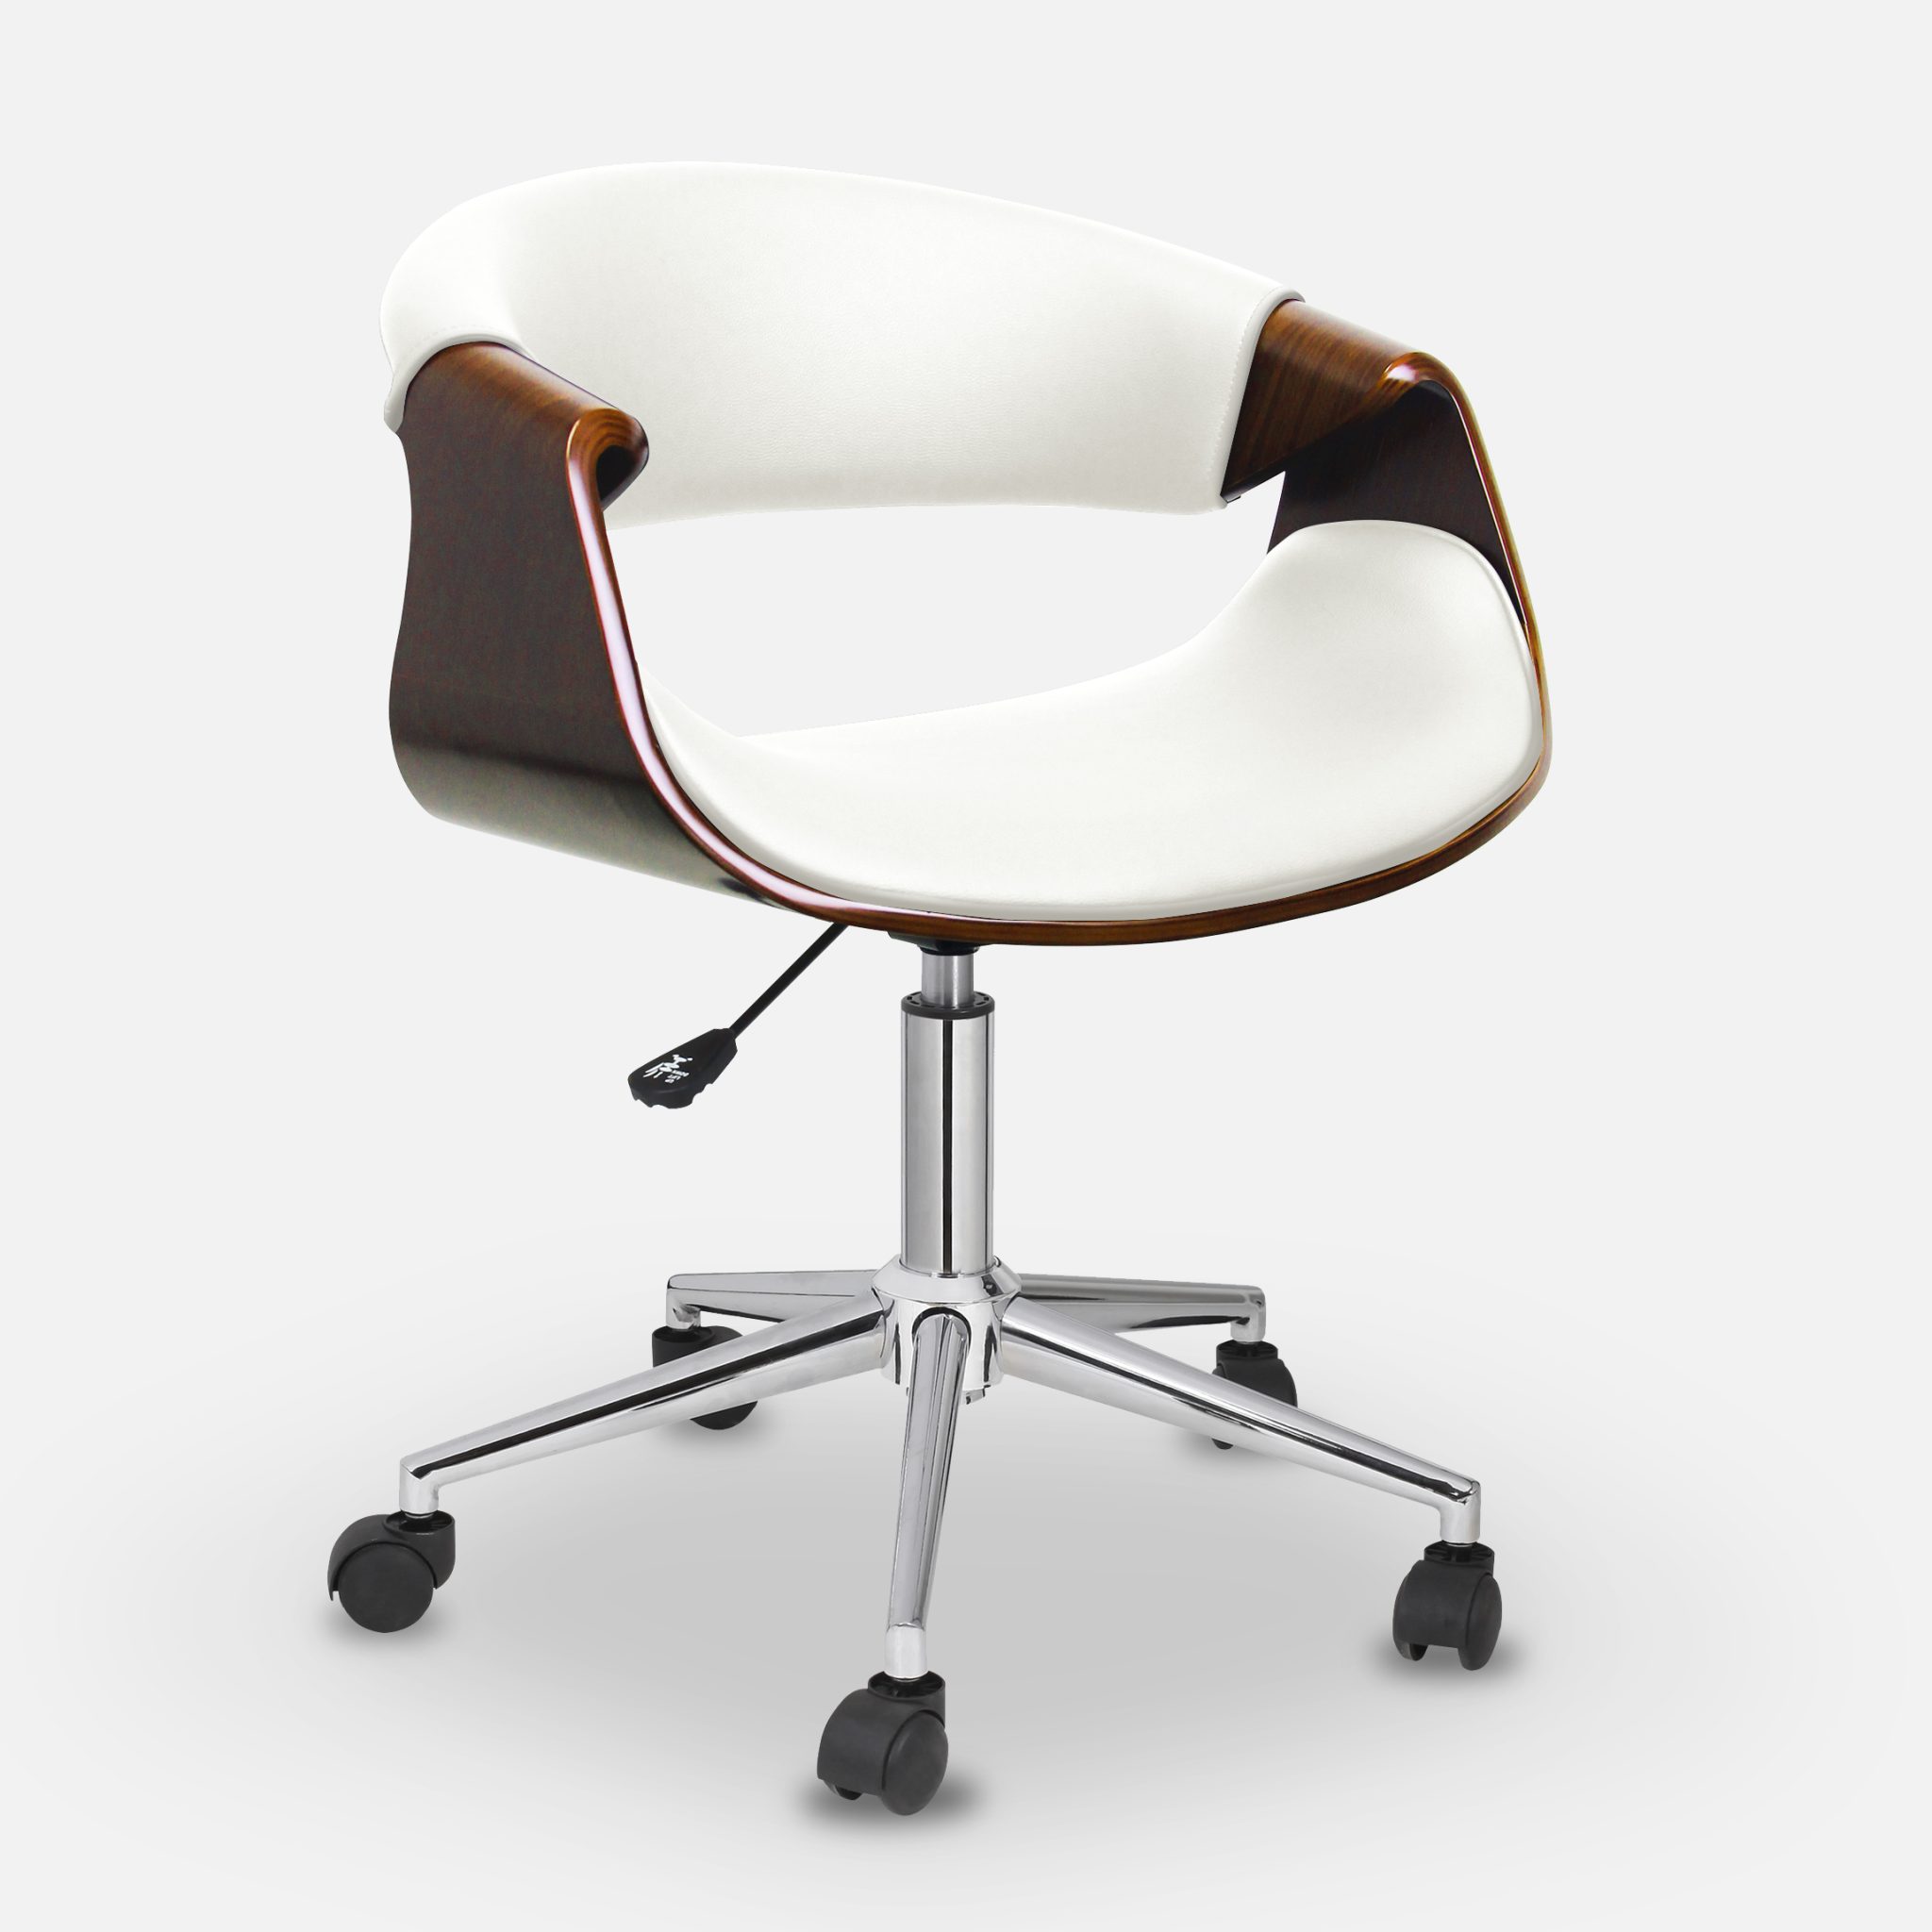 Curve Danish Low Back Office Chair_White 1